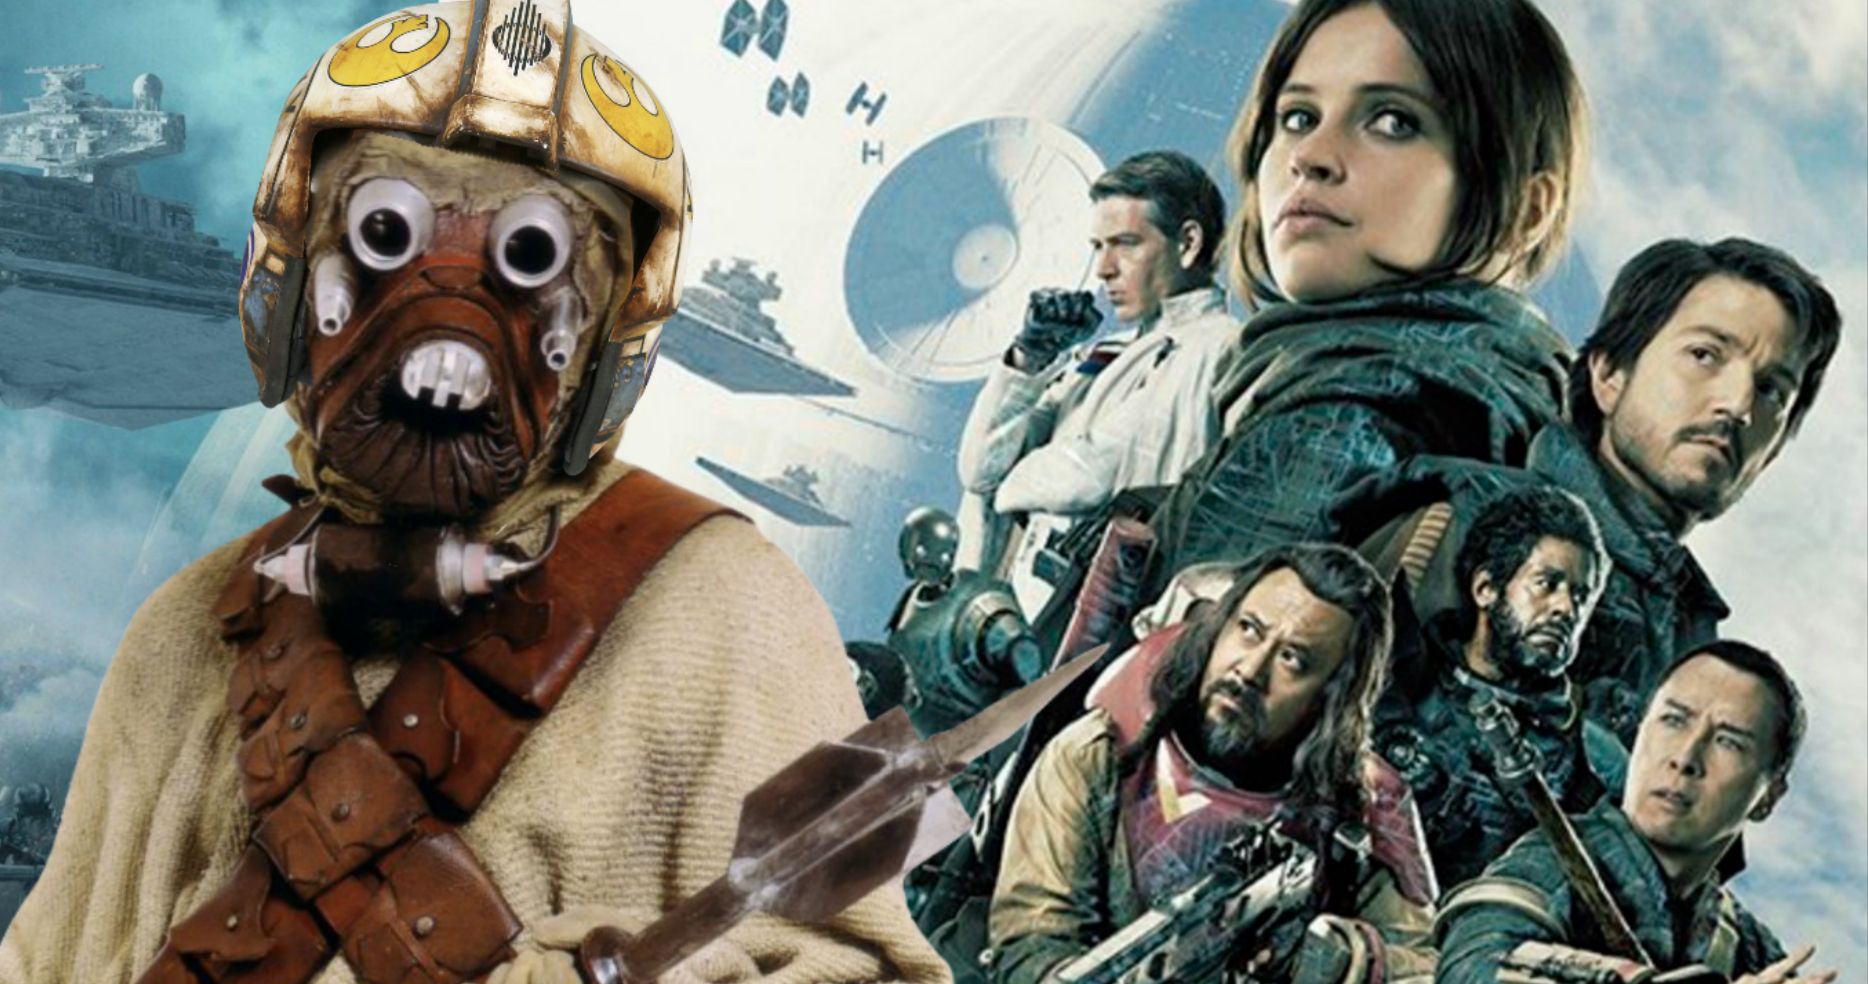 Tusken Raiders in the Rebel Alliance? Rogue One Almost Made It Happen